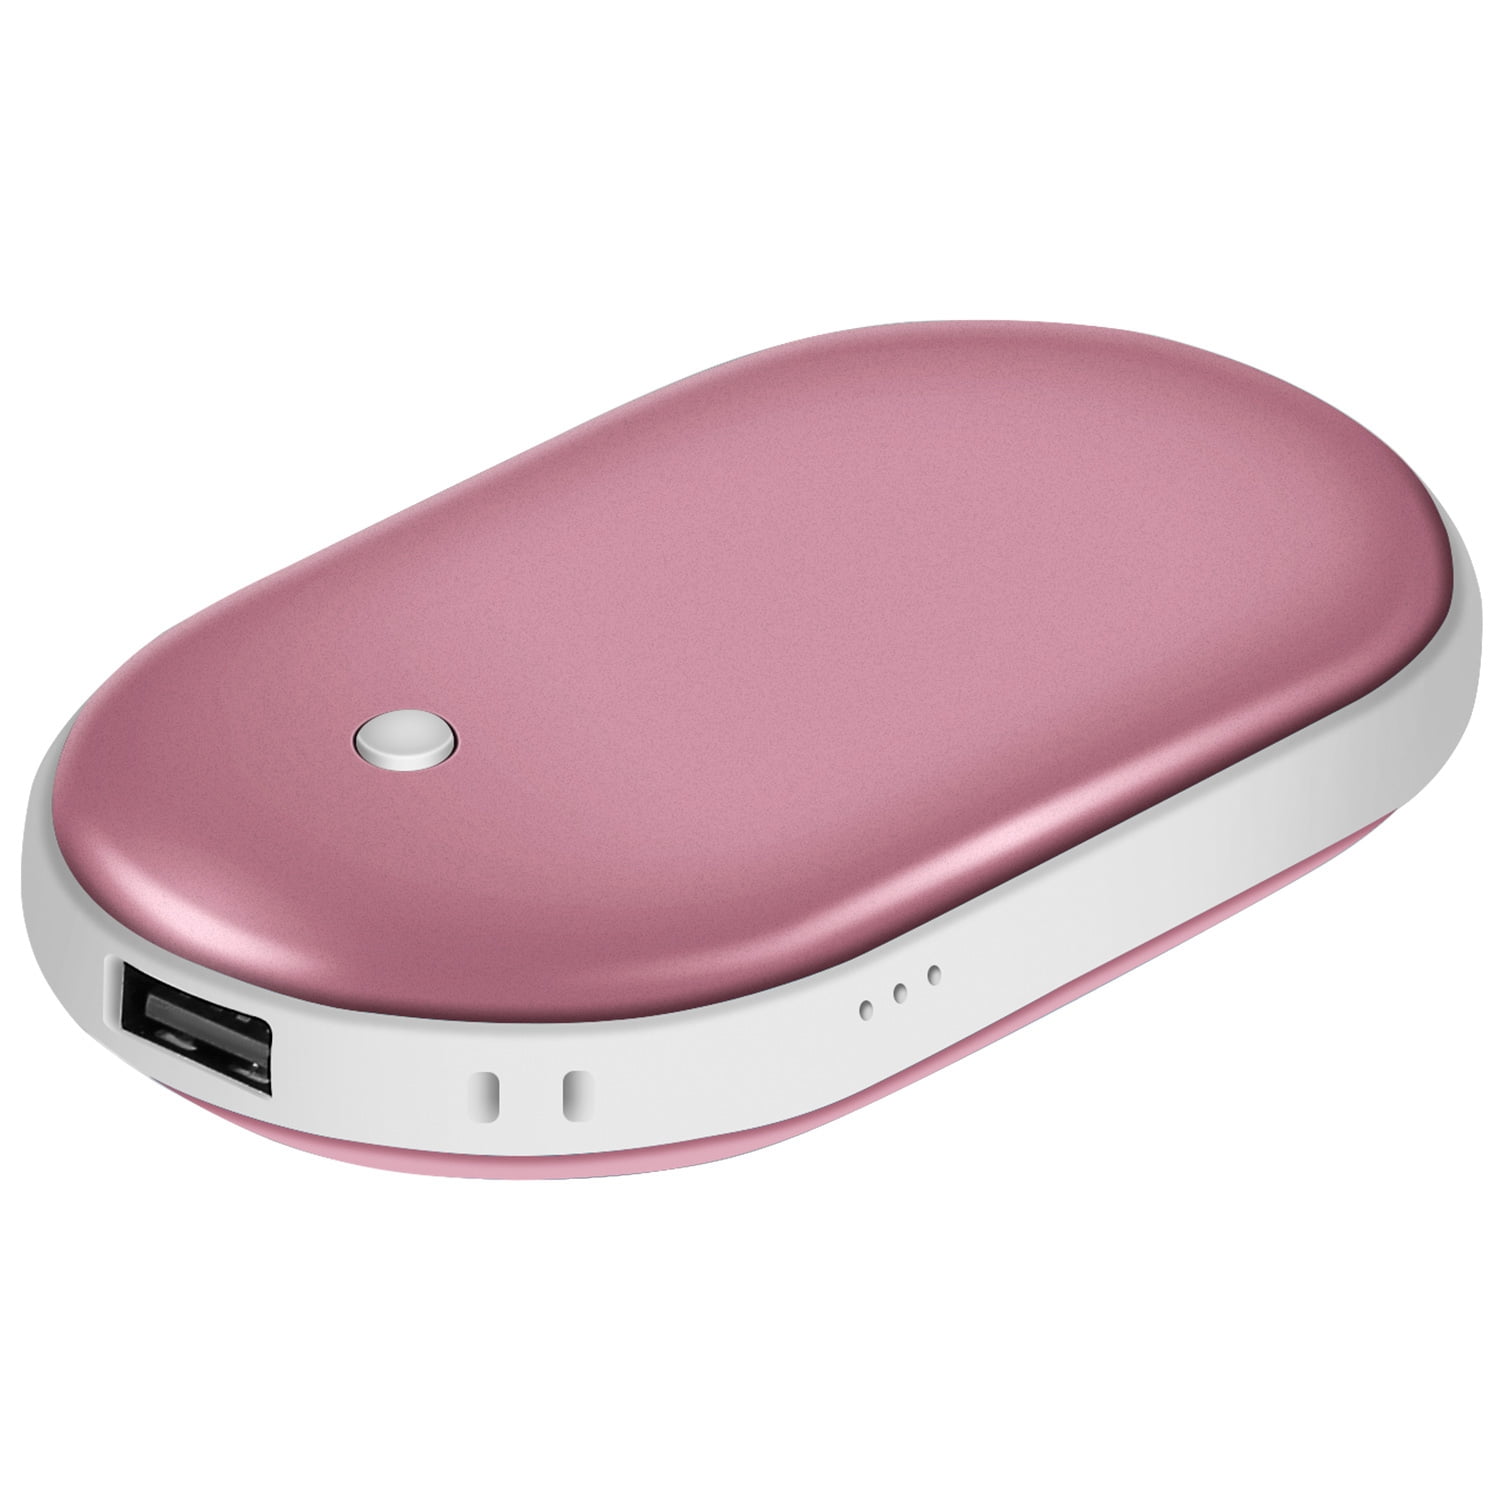 Pocket Hand Warmer Rechargeable Portable 5200mAh USB Power Bank Phone Charger 